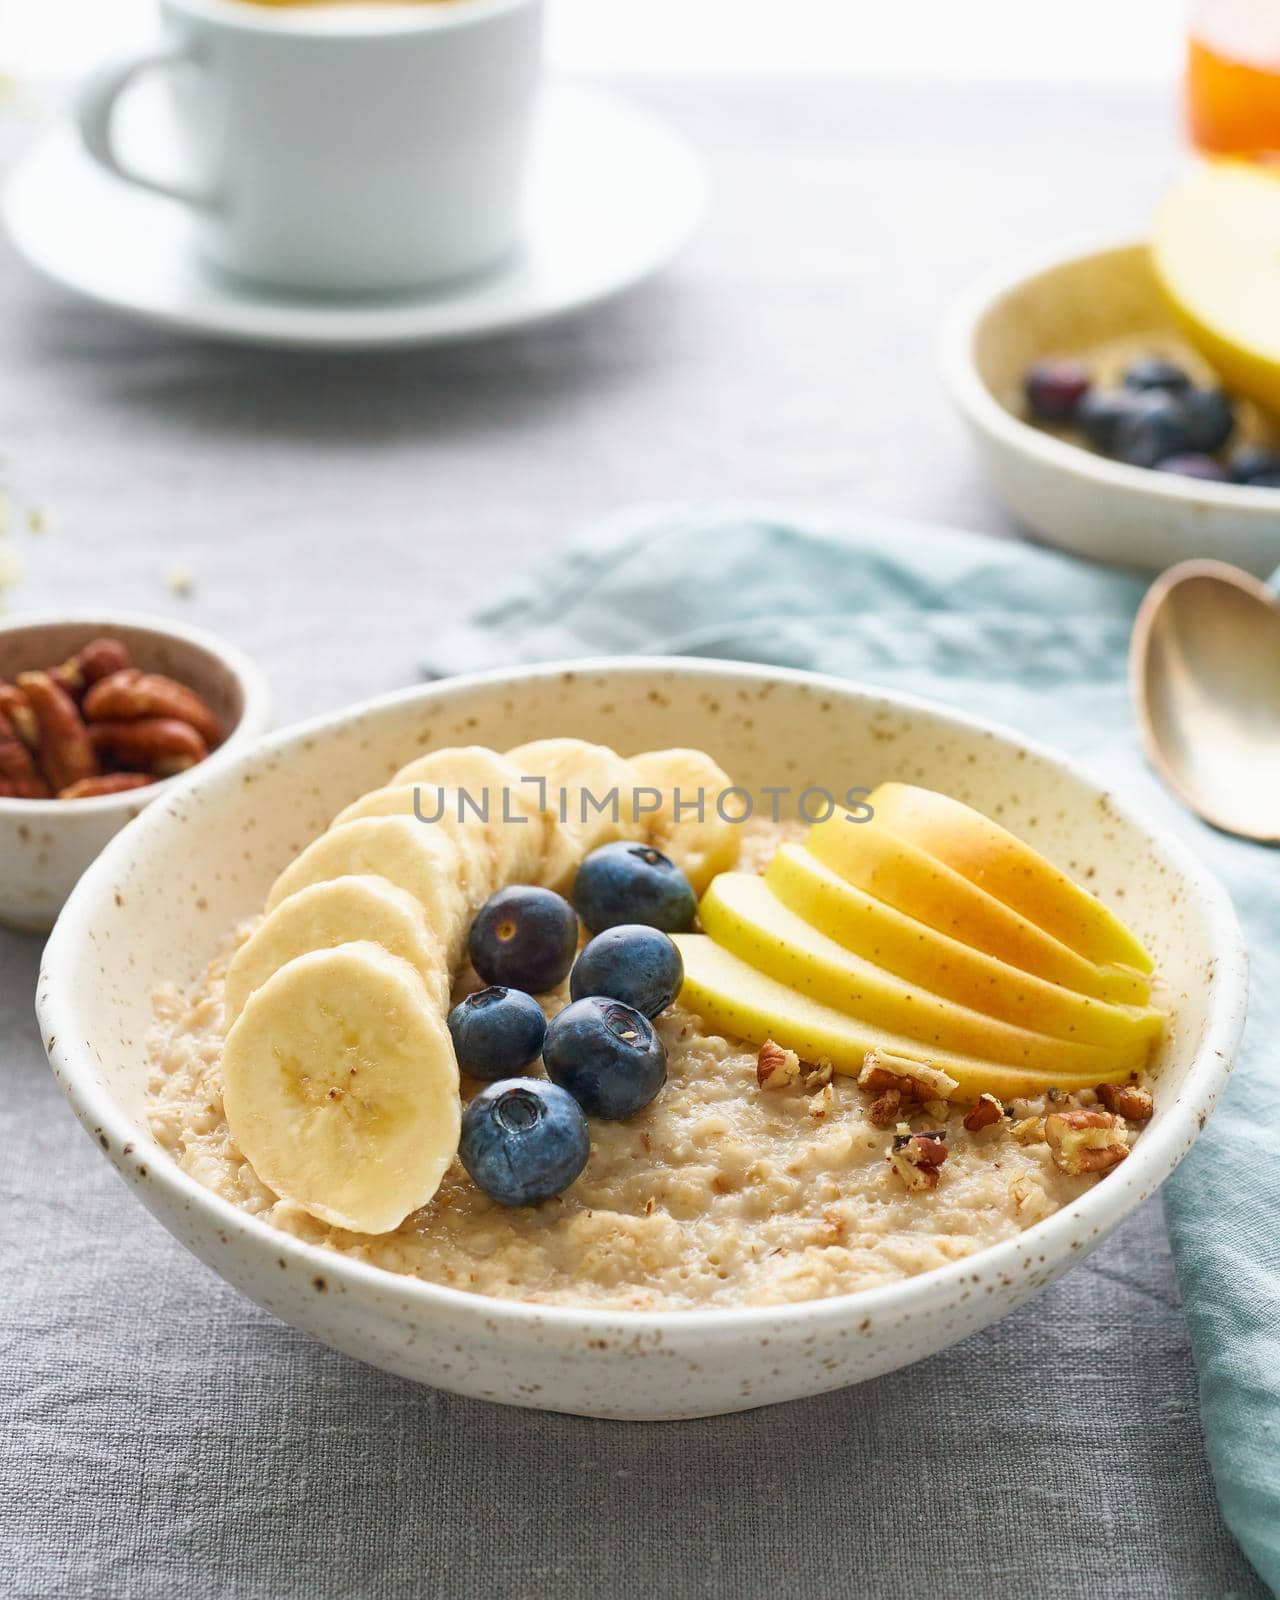 Whole oatmeal, large bowl of porridge with banana, blueberries, apple, nuts for breakfast, morning meal. Side view, close up, vertical, gray table. Vegan tasty healthy diet.